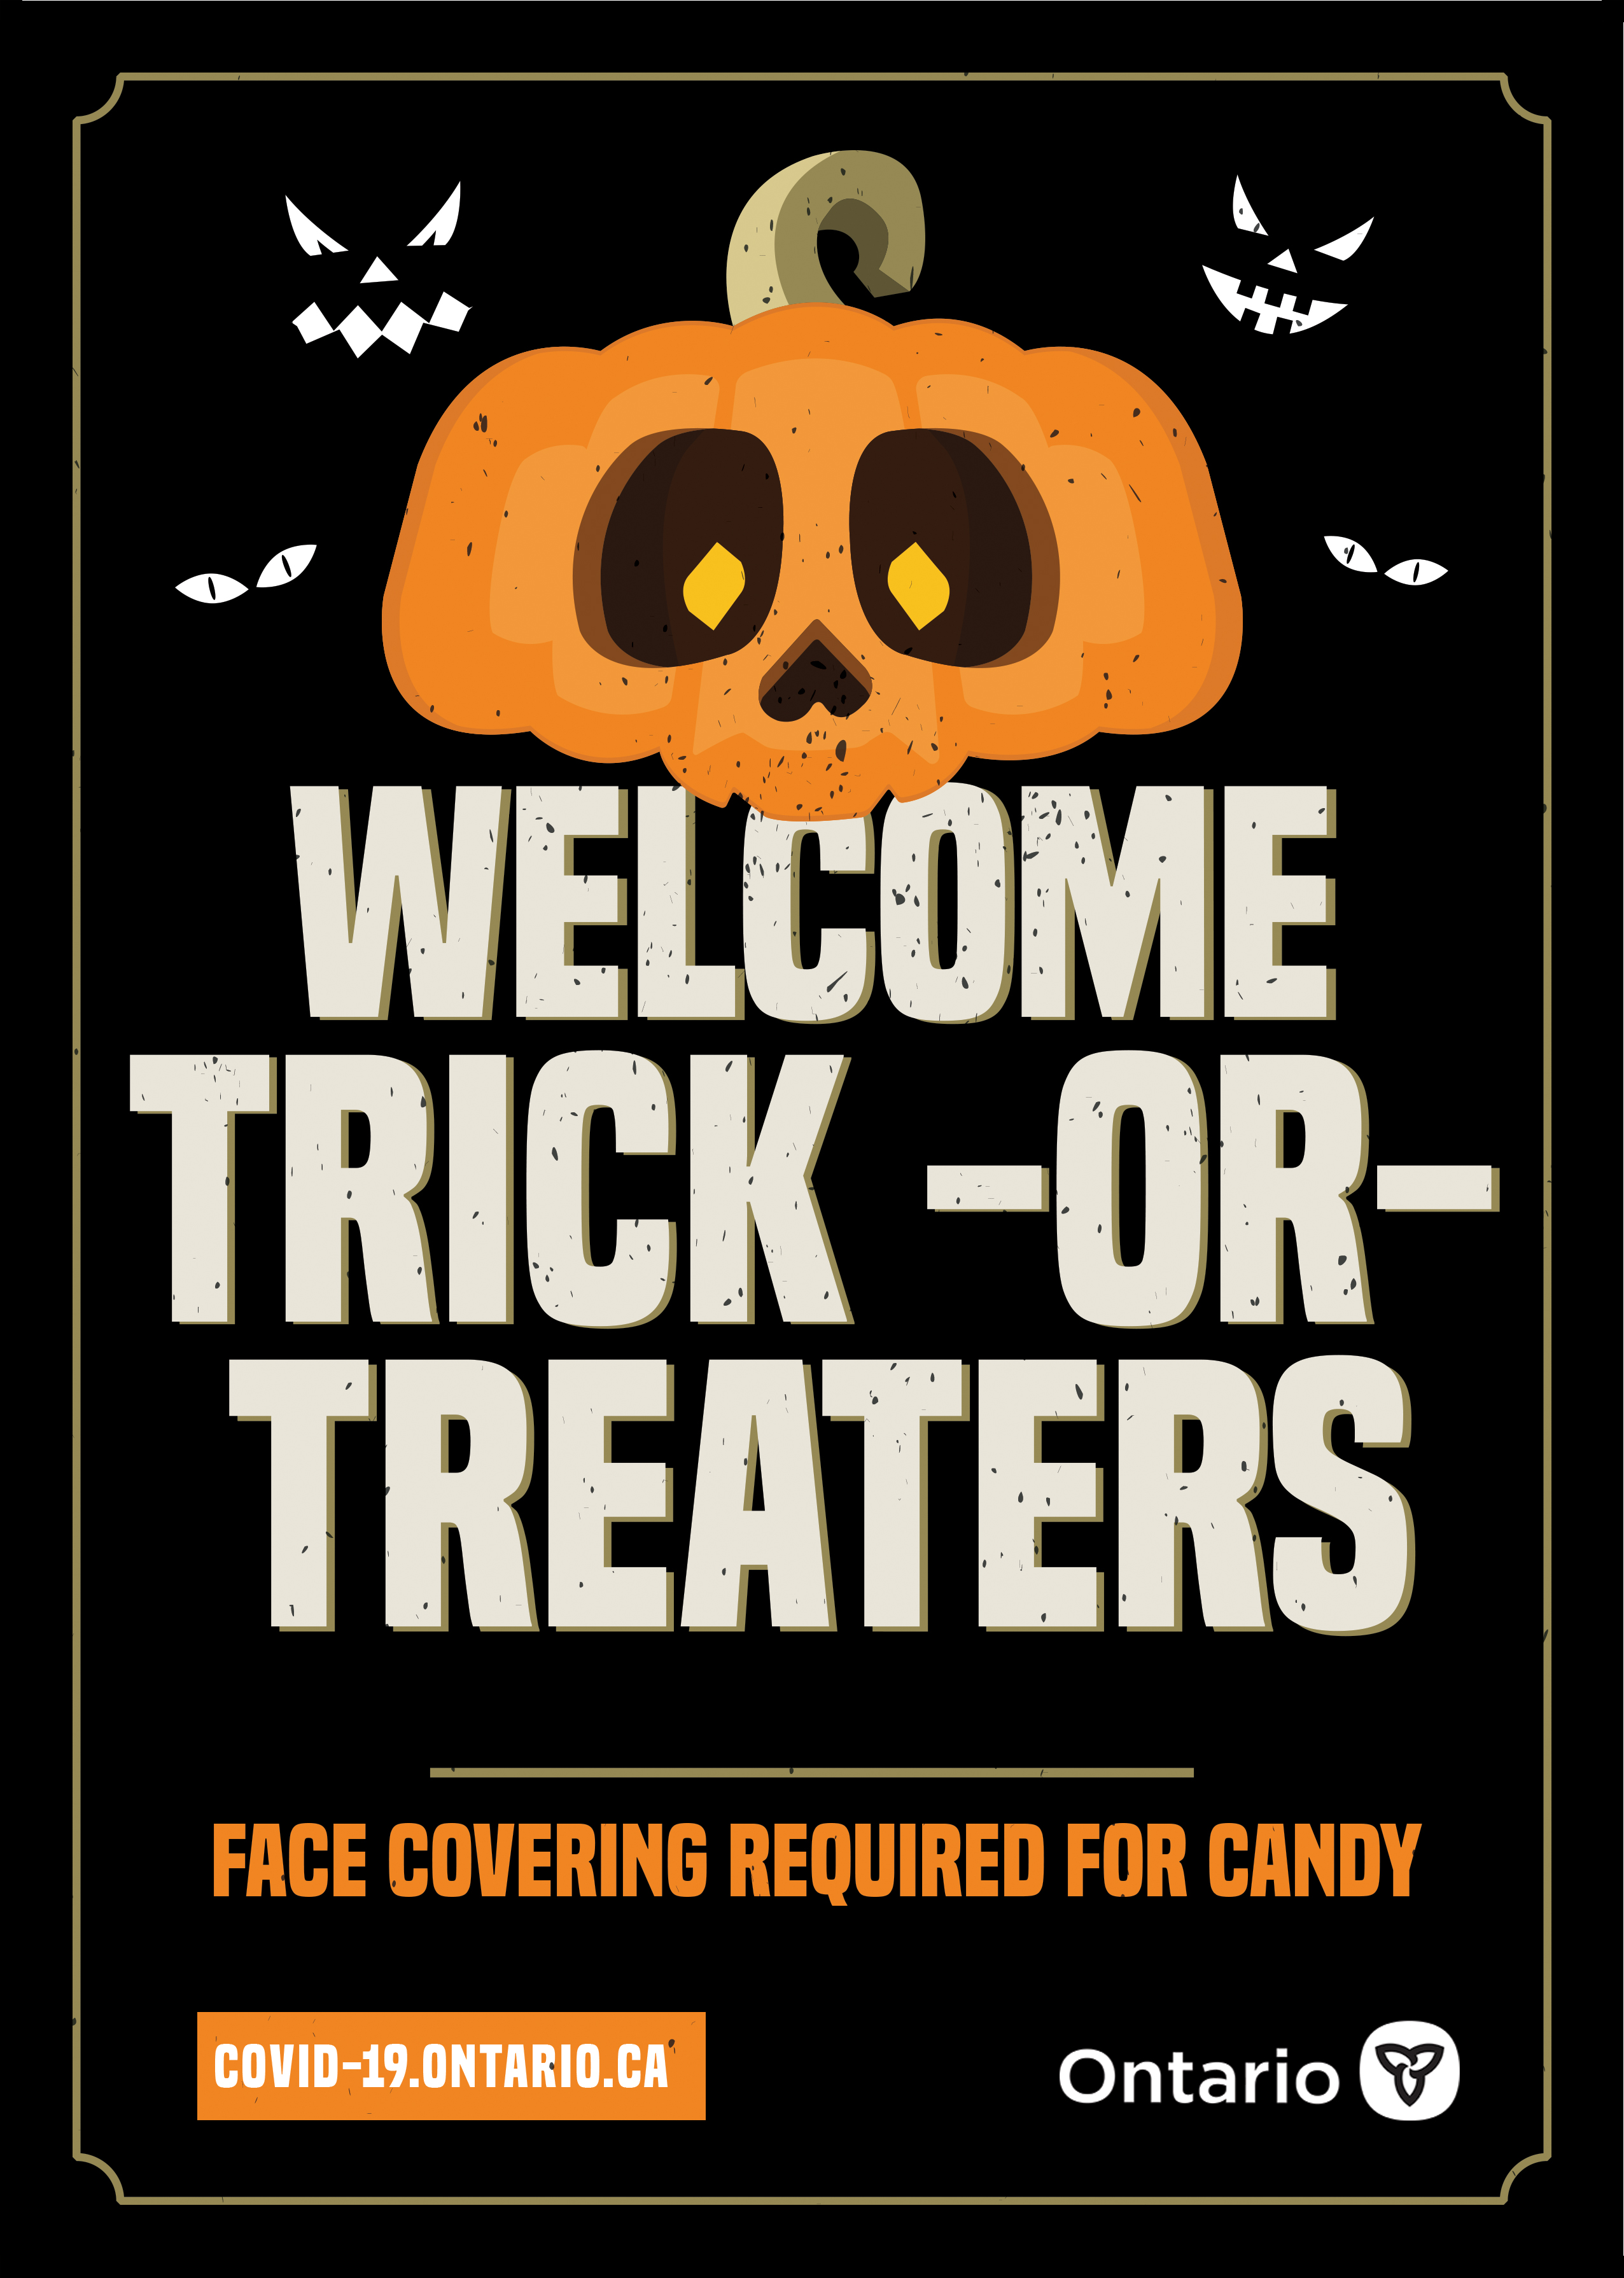 Trickortreat in the age of COVID 13 safety tips for giving and